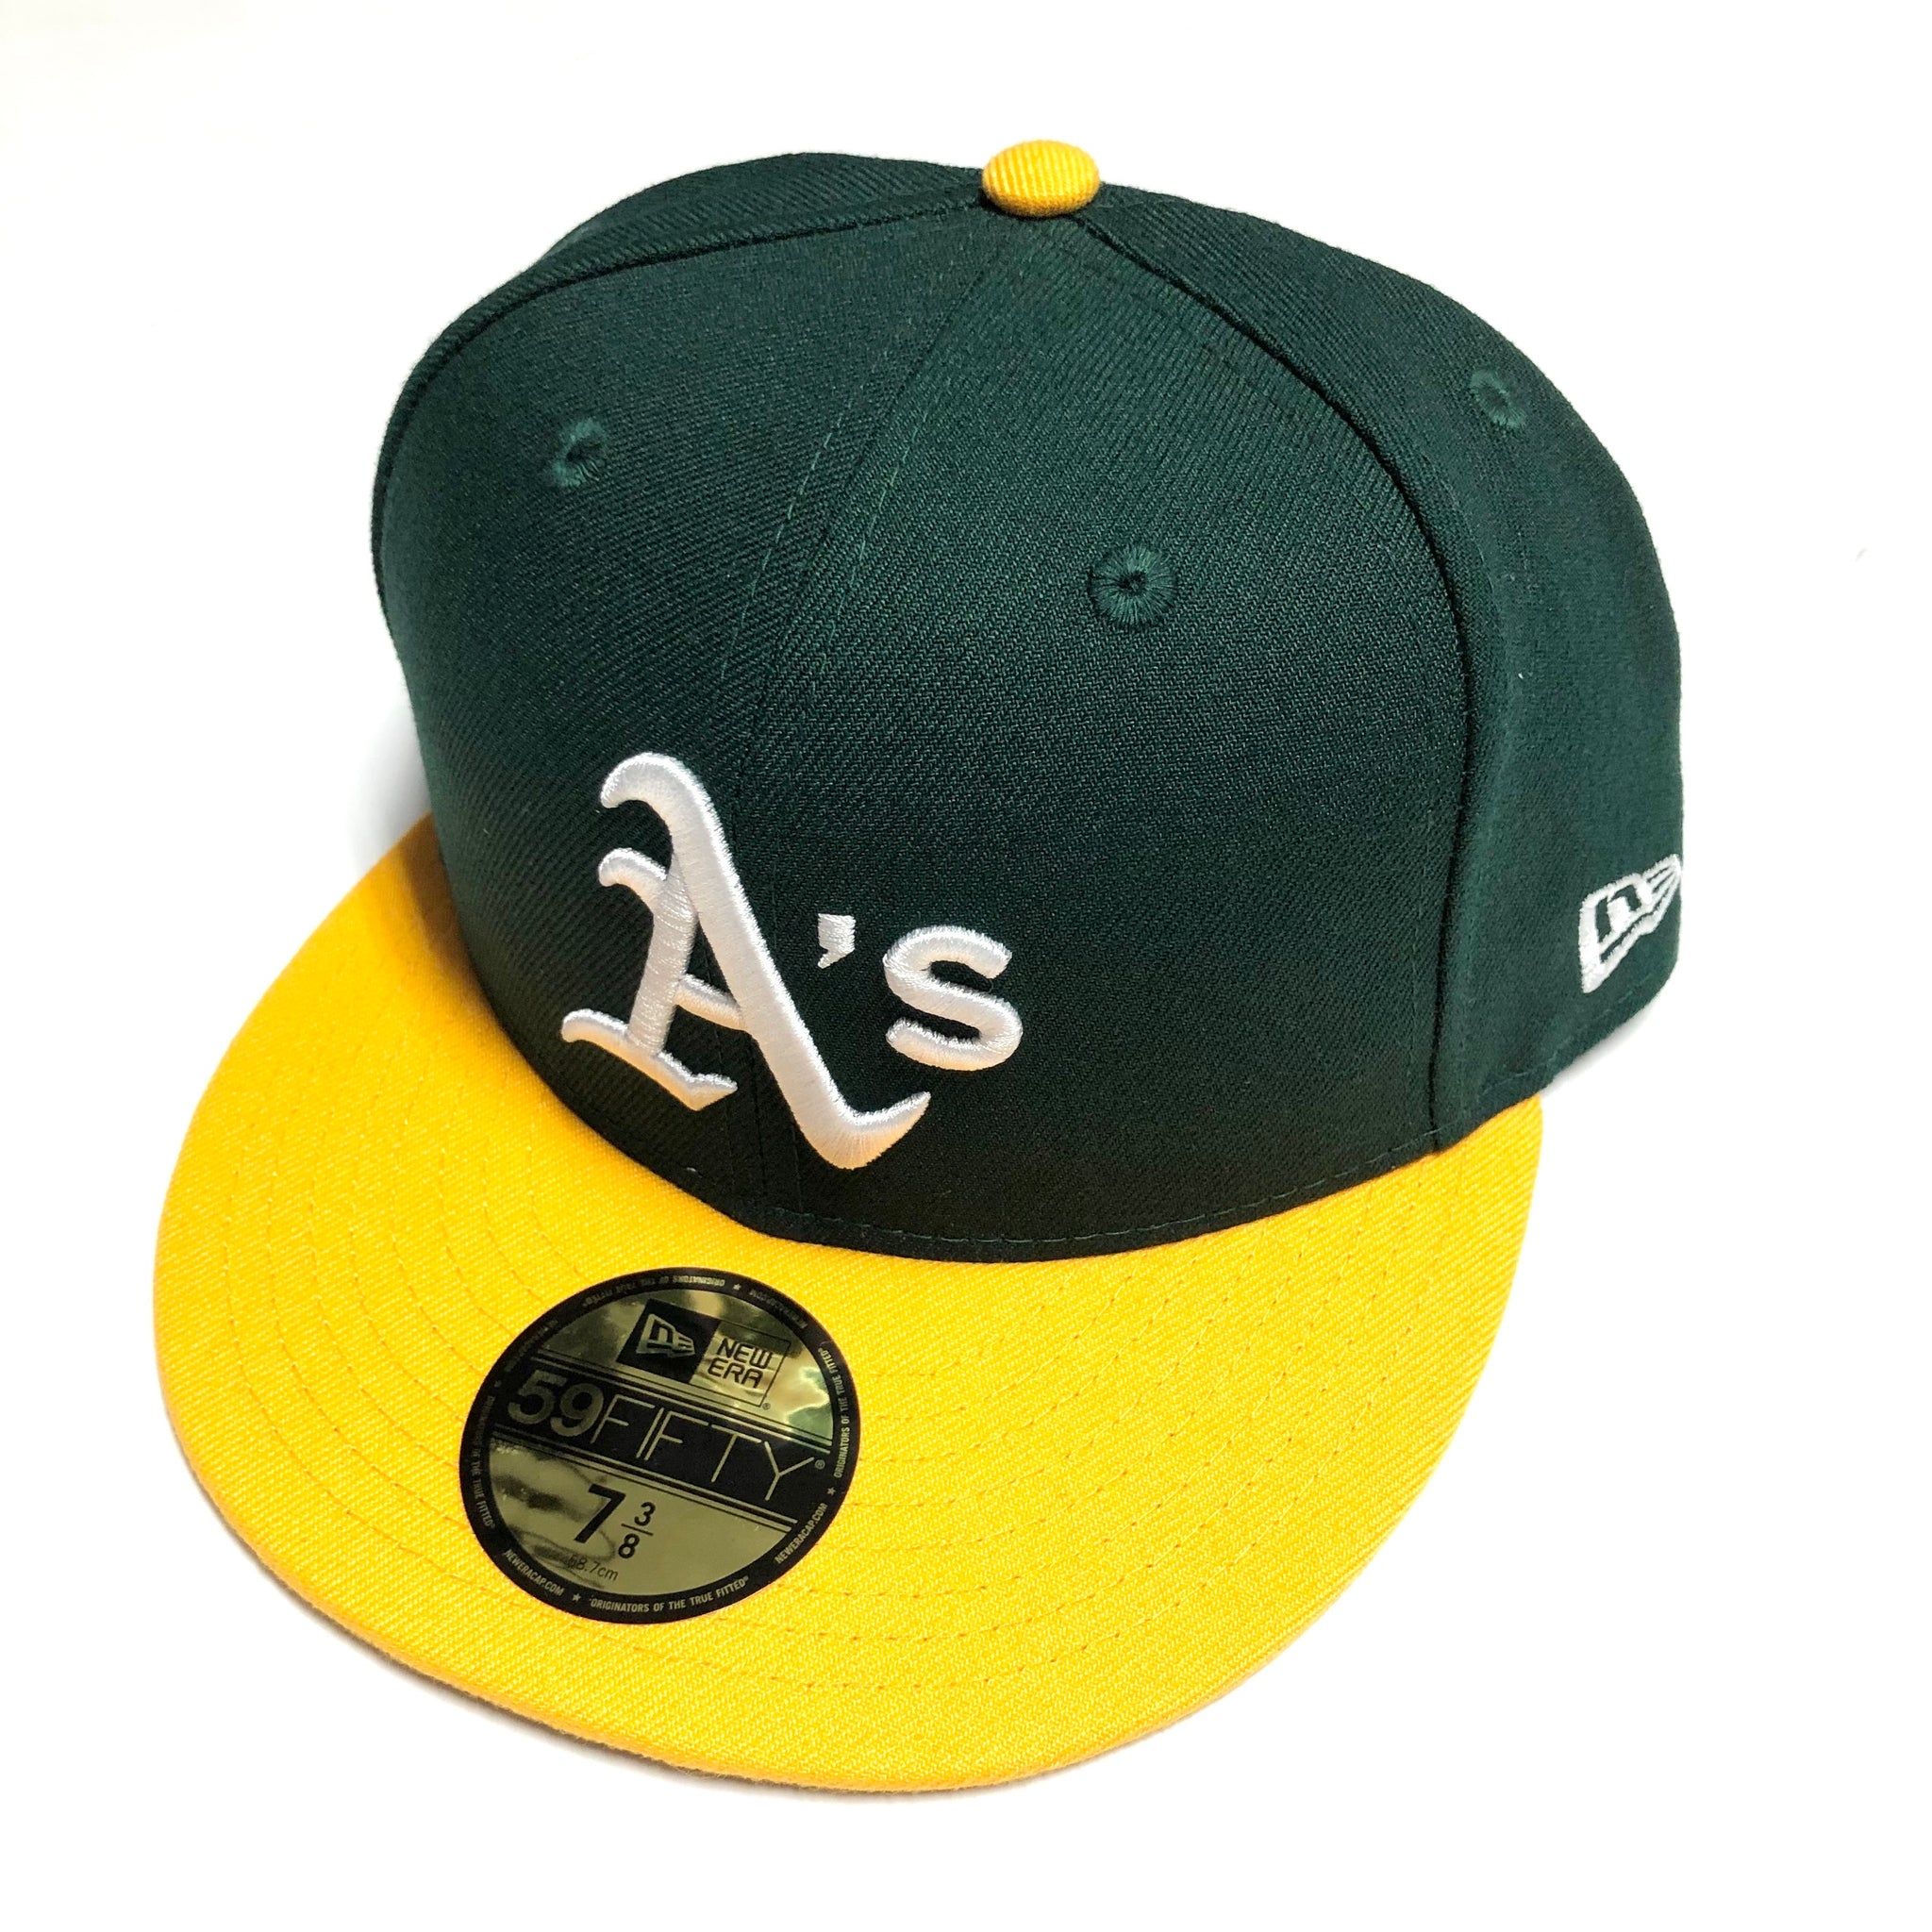 New Era Oakland A's Hat - clothing & accessories - by owner